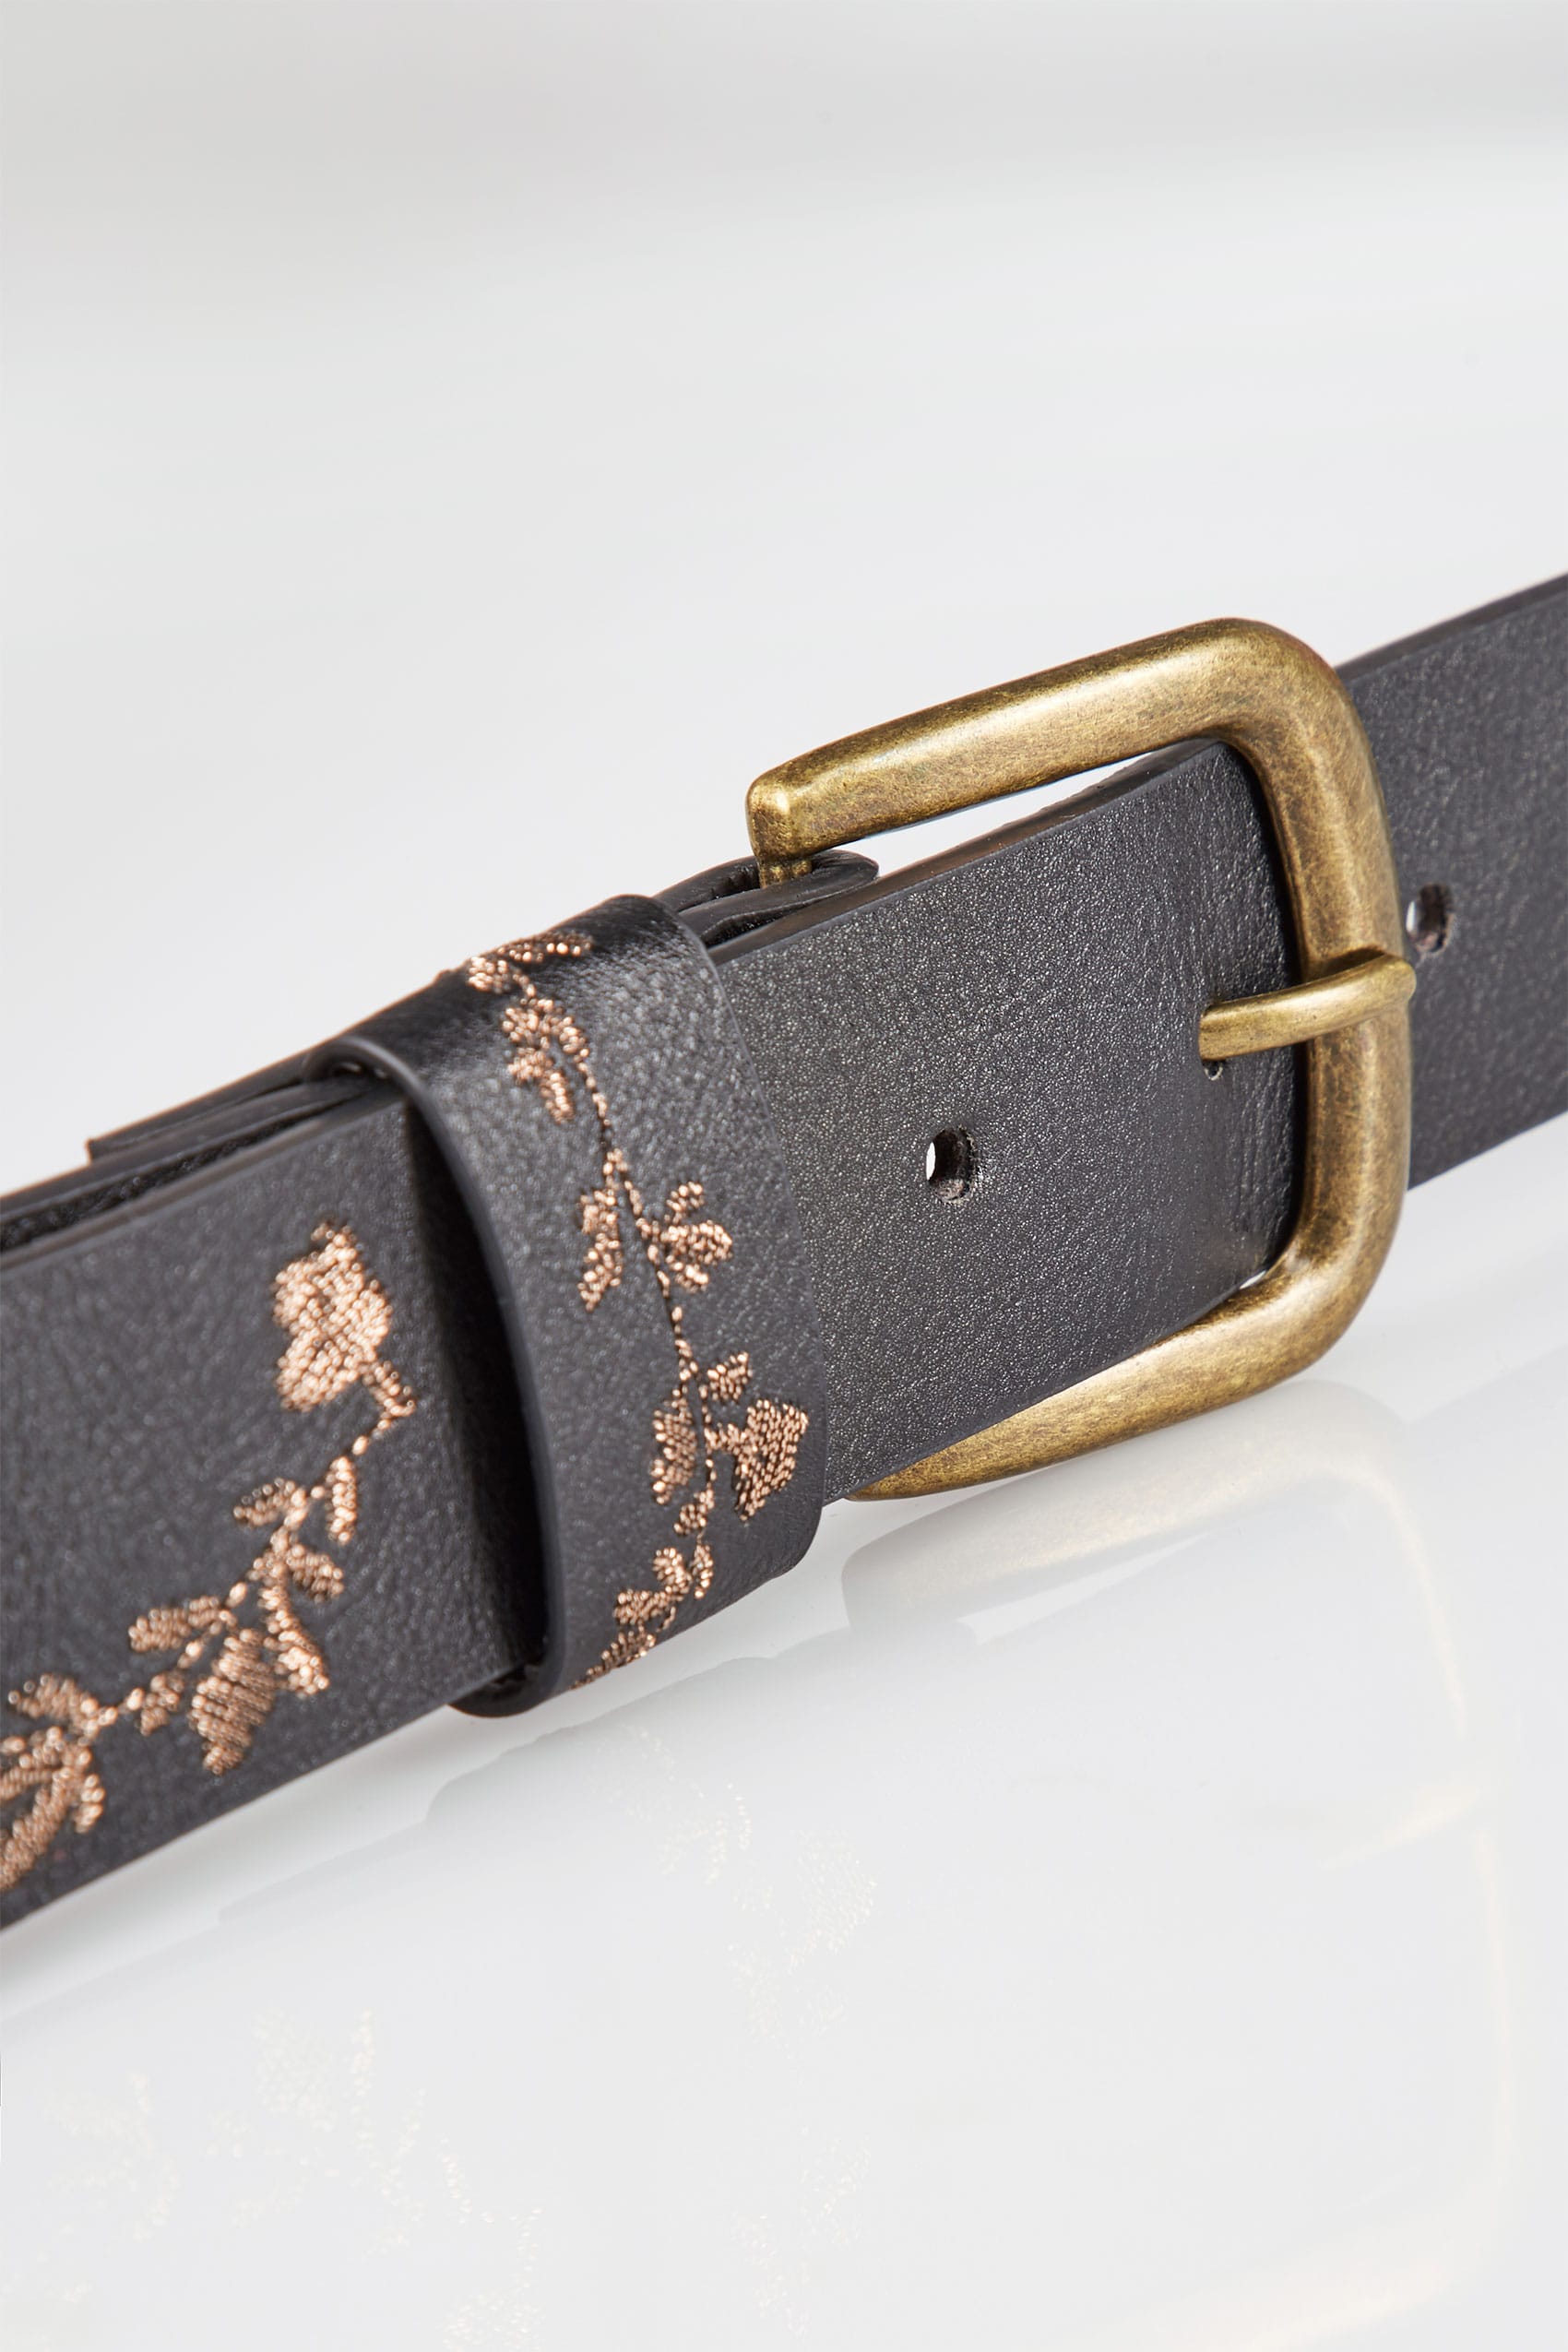 Black & Gold Floral Embroidered Belt, Size 16 to 321700 x 2550